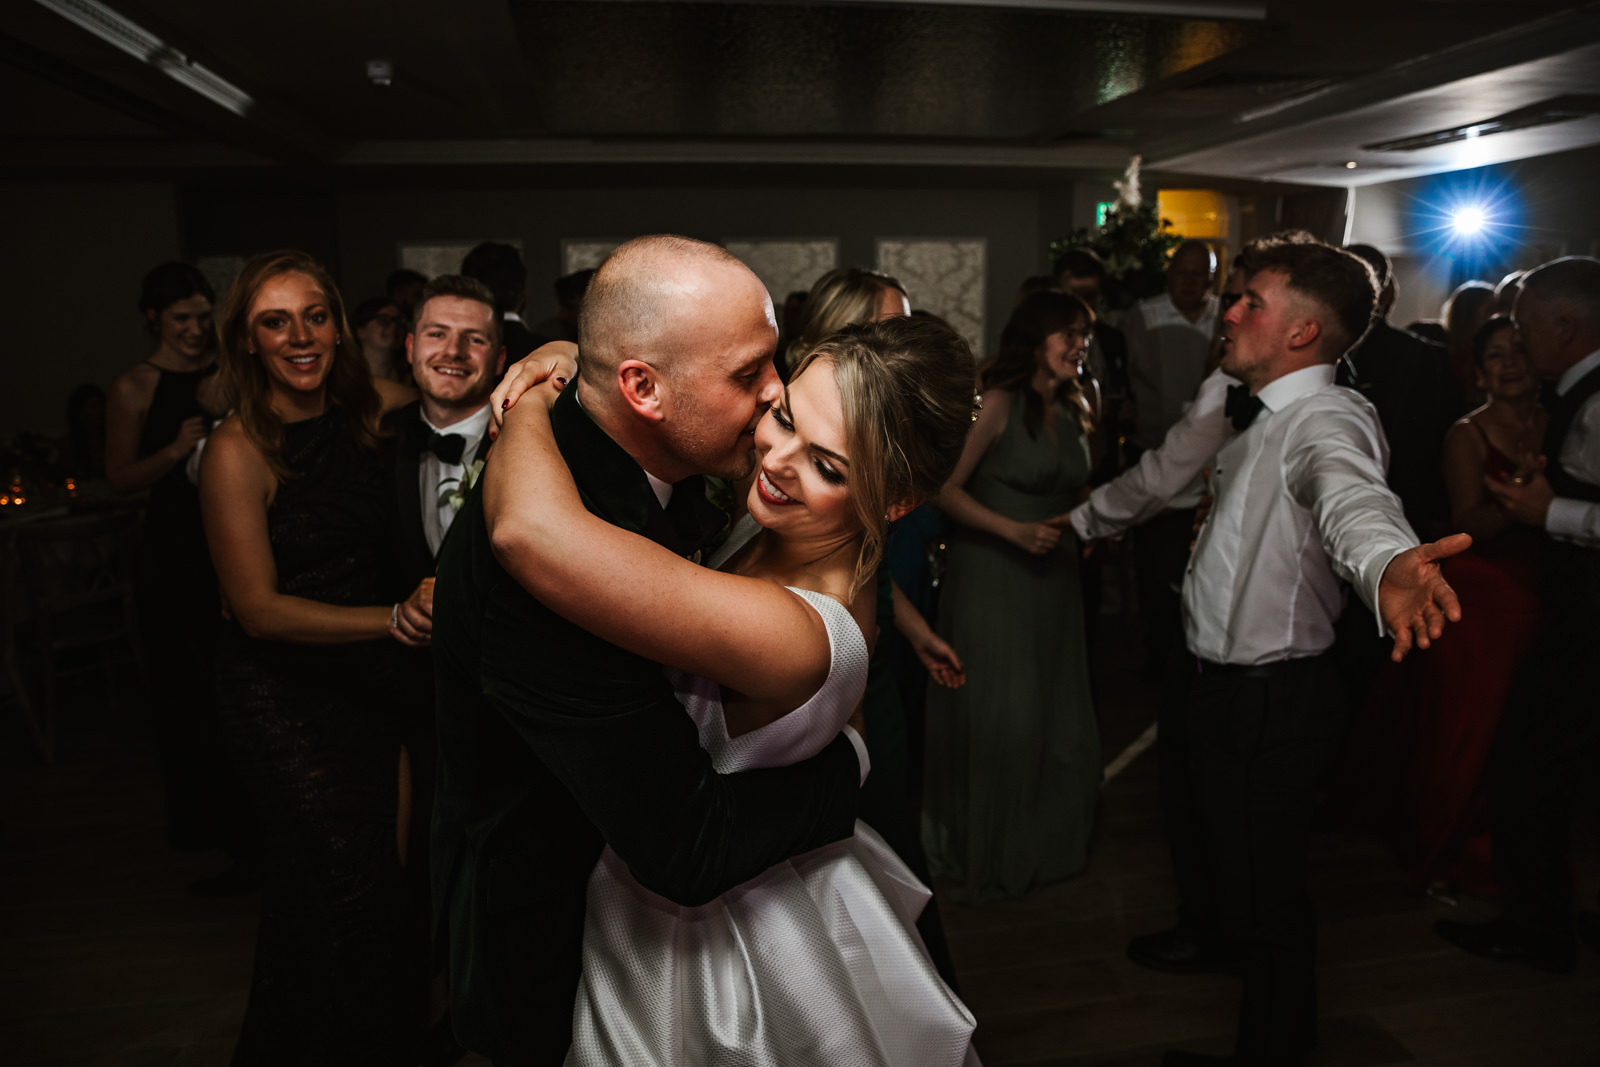 First dance at Old Palace Chester